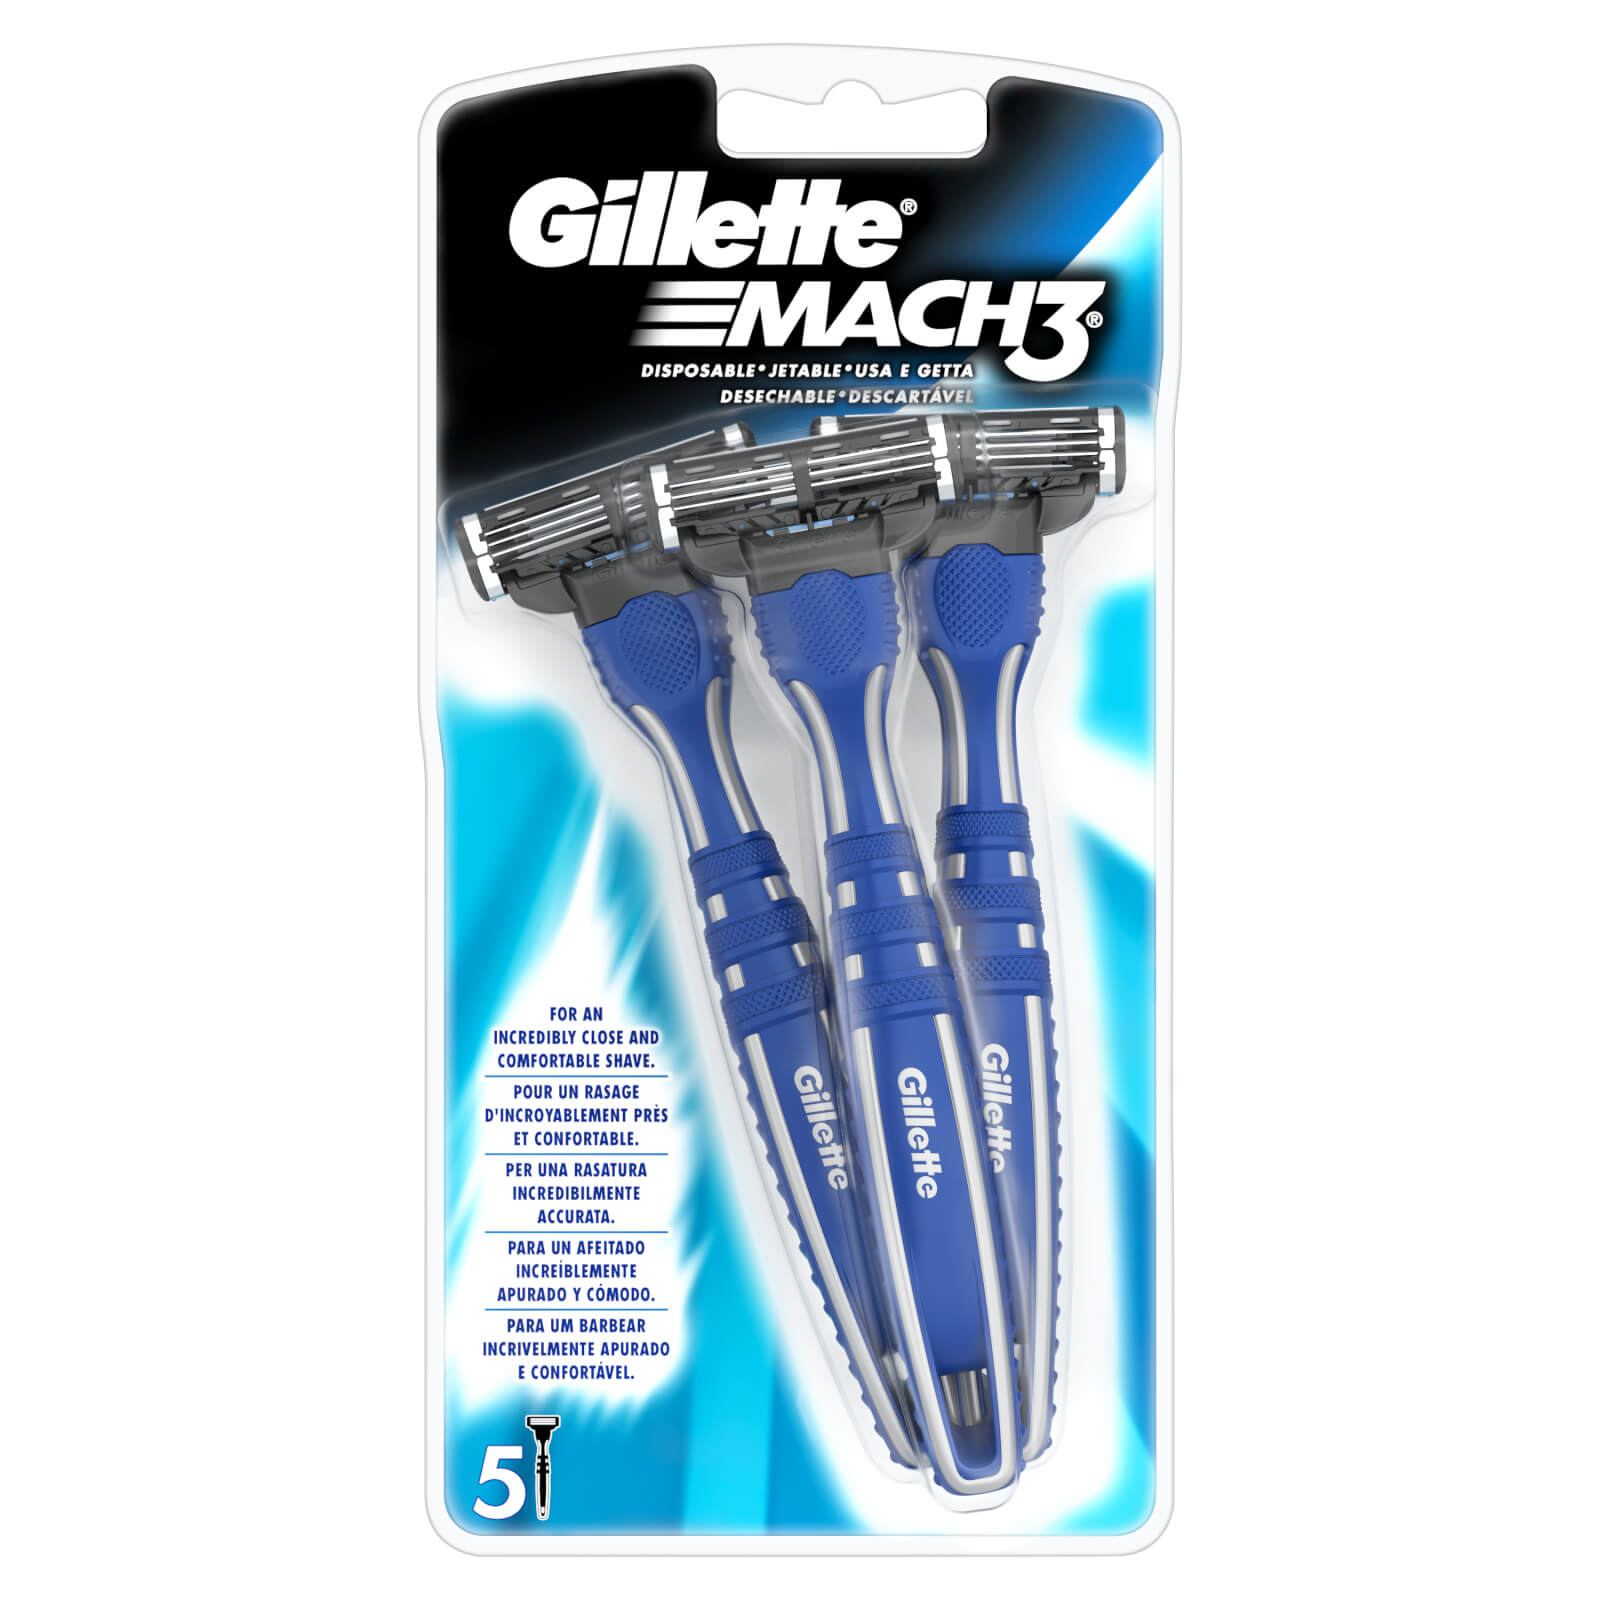 Gillette Mach3 Disposable Razors - 5 Pack - 1 Month